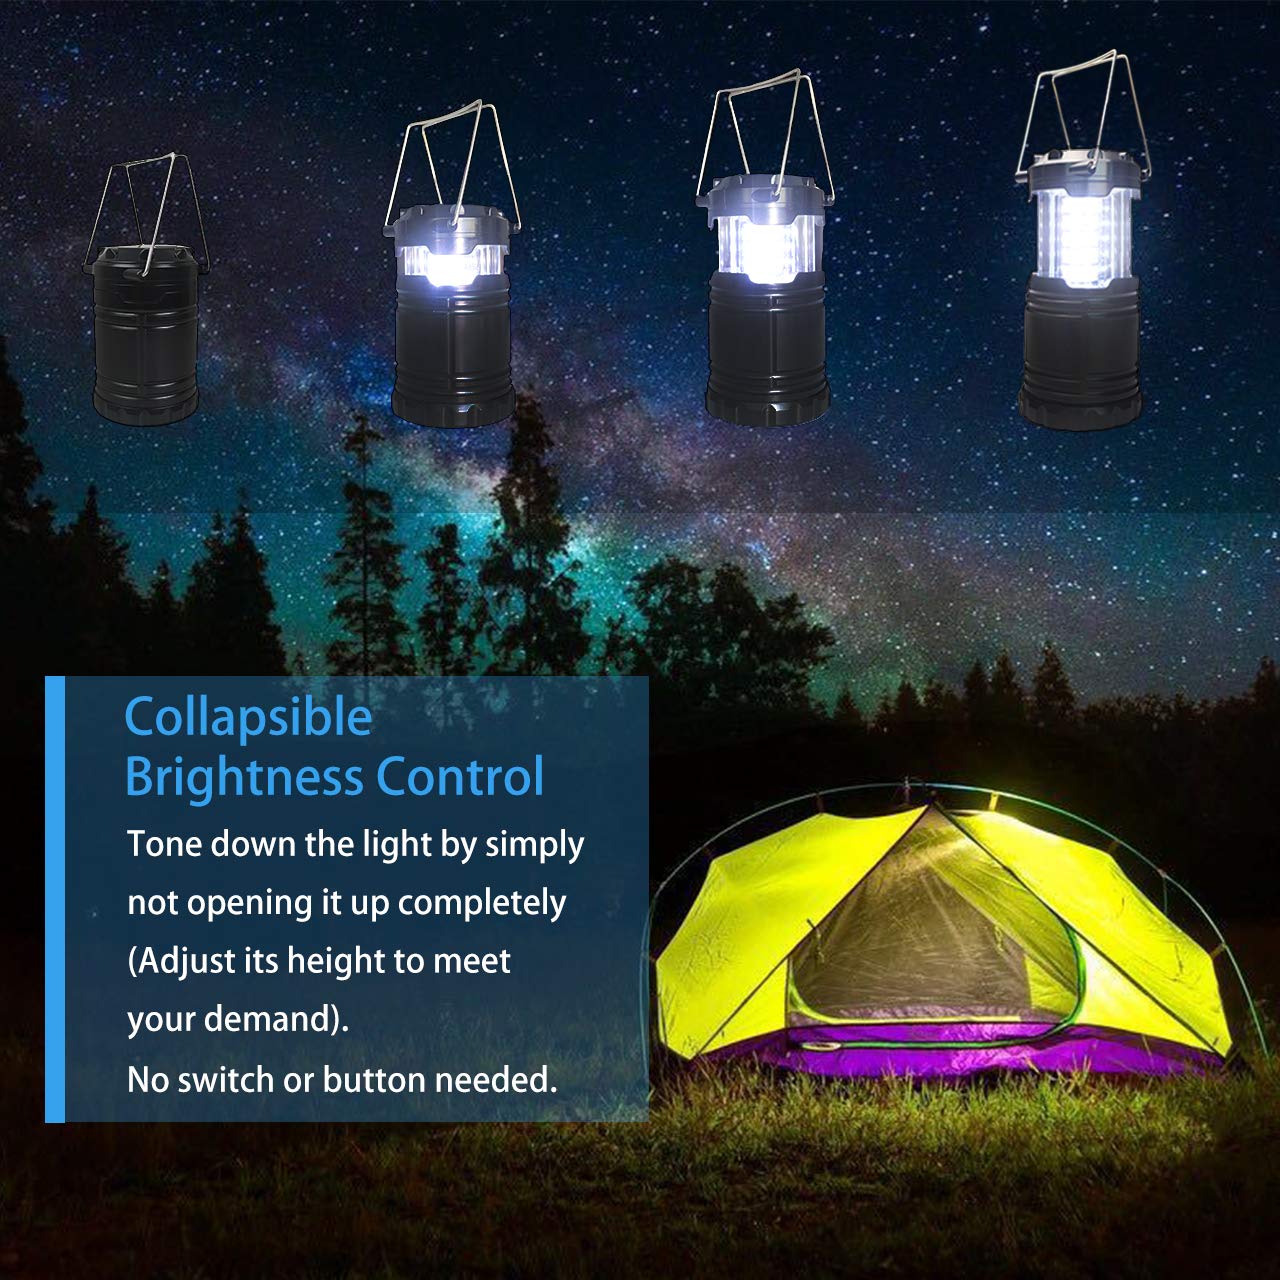 Gioyonil LED Camping Lantern Lamp, 2 Pack Portable Battery Powered Collapsible Tent Lights Pop Up Flashlight Survival Kits for Hurricane Storm, Home Emergency, Power Outage, Hiking